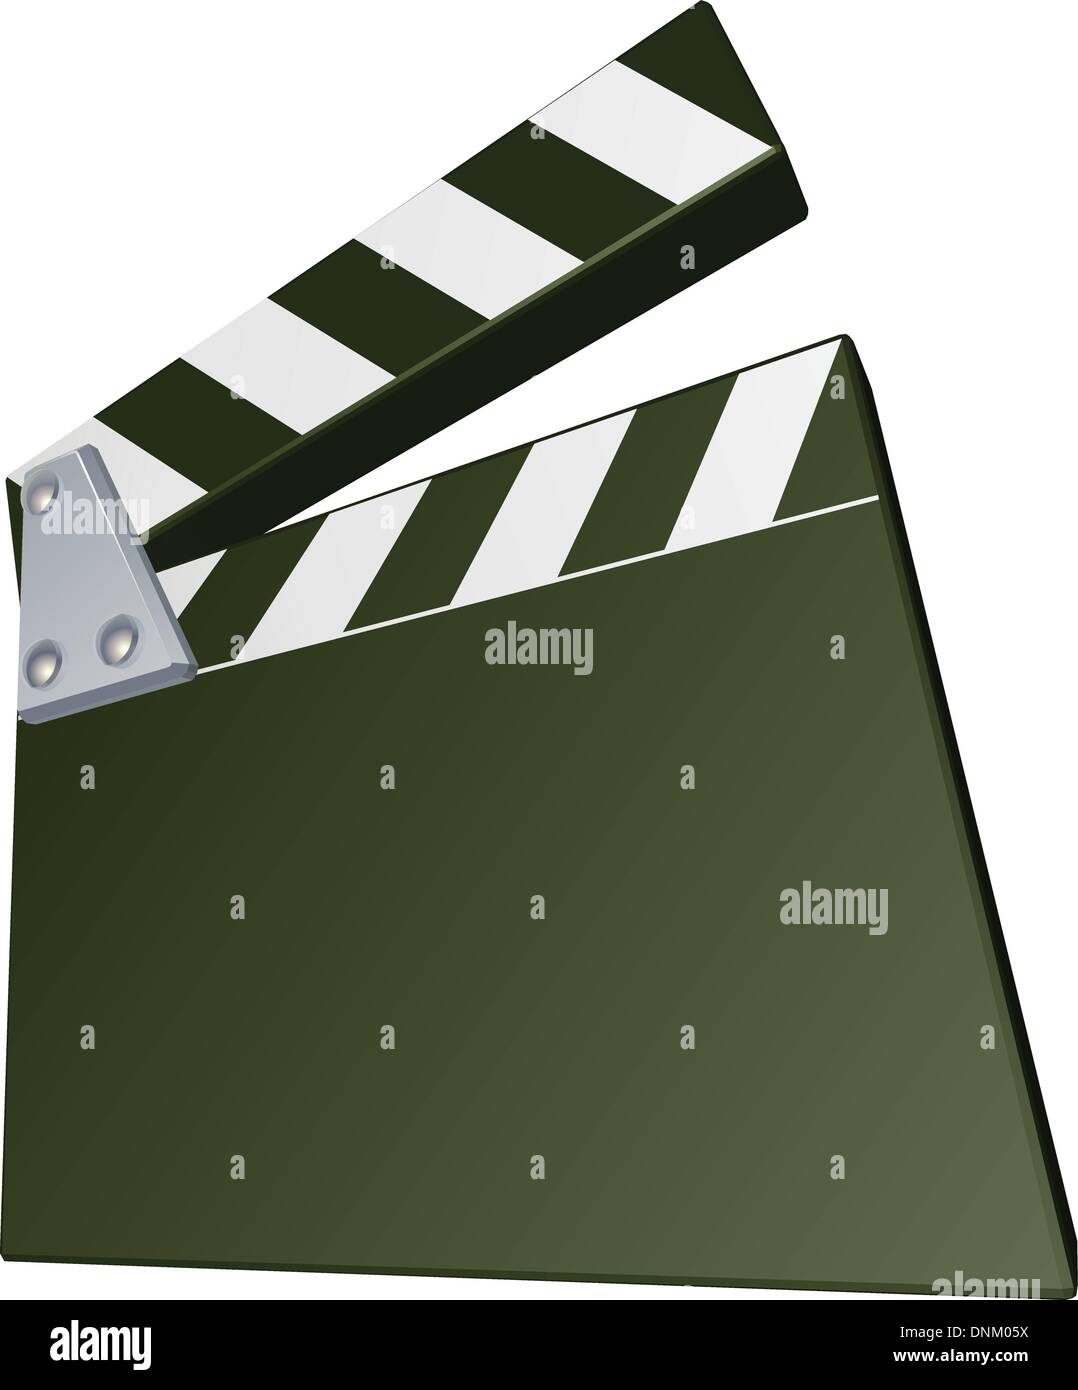 A film clap clapper board clapperboard illustration with dynamic perspective. Copyspace on the board for your text. Stock Vector